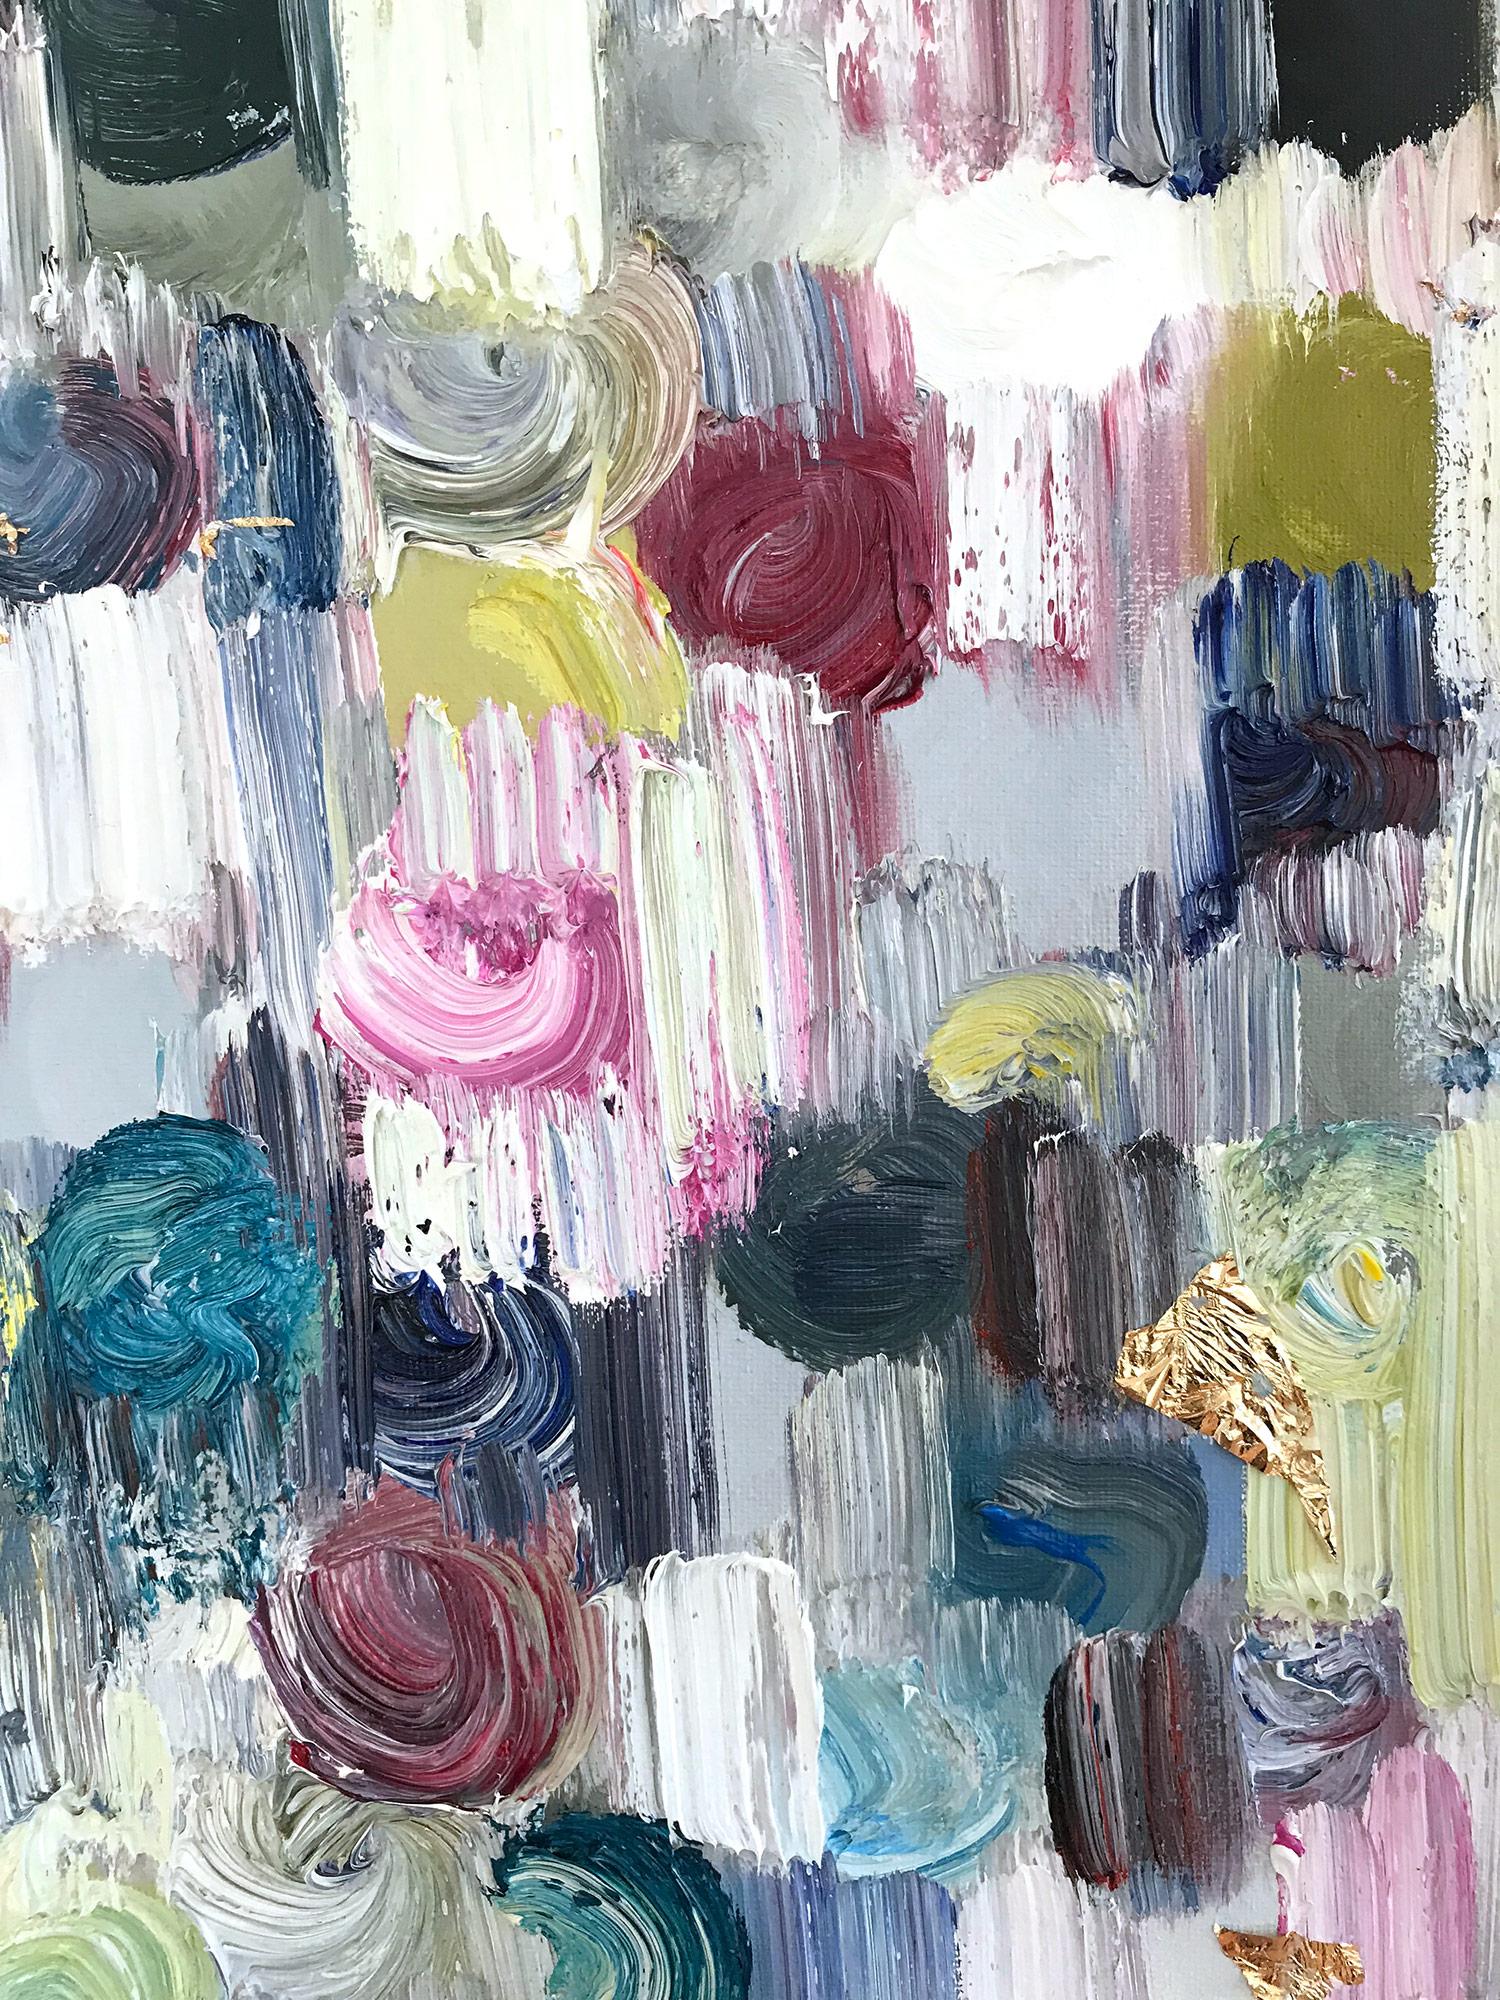 With layers of bright oils and whisking brush strokes, the paint is able to shine and shimmer in a very unique pattern. This painting is from Shaoul's more modern collective works with a very decorative contemporary style. The way the paint blends